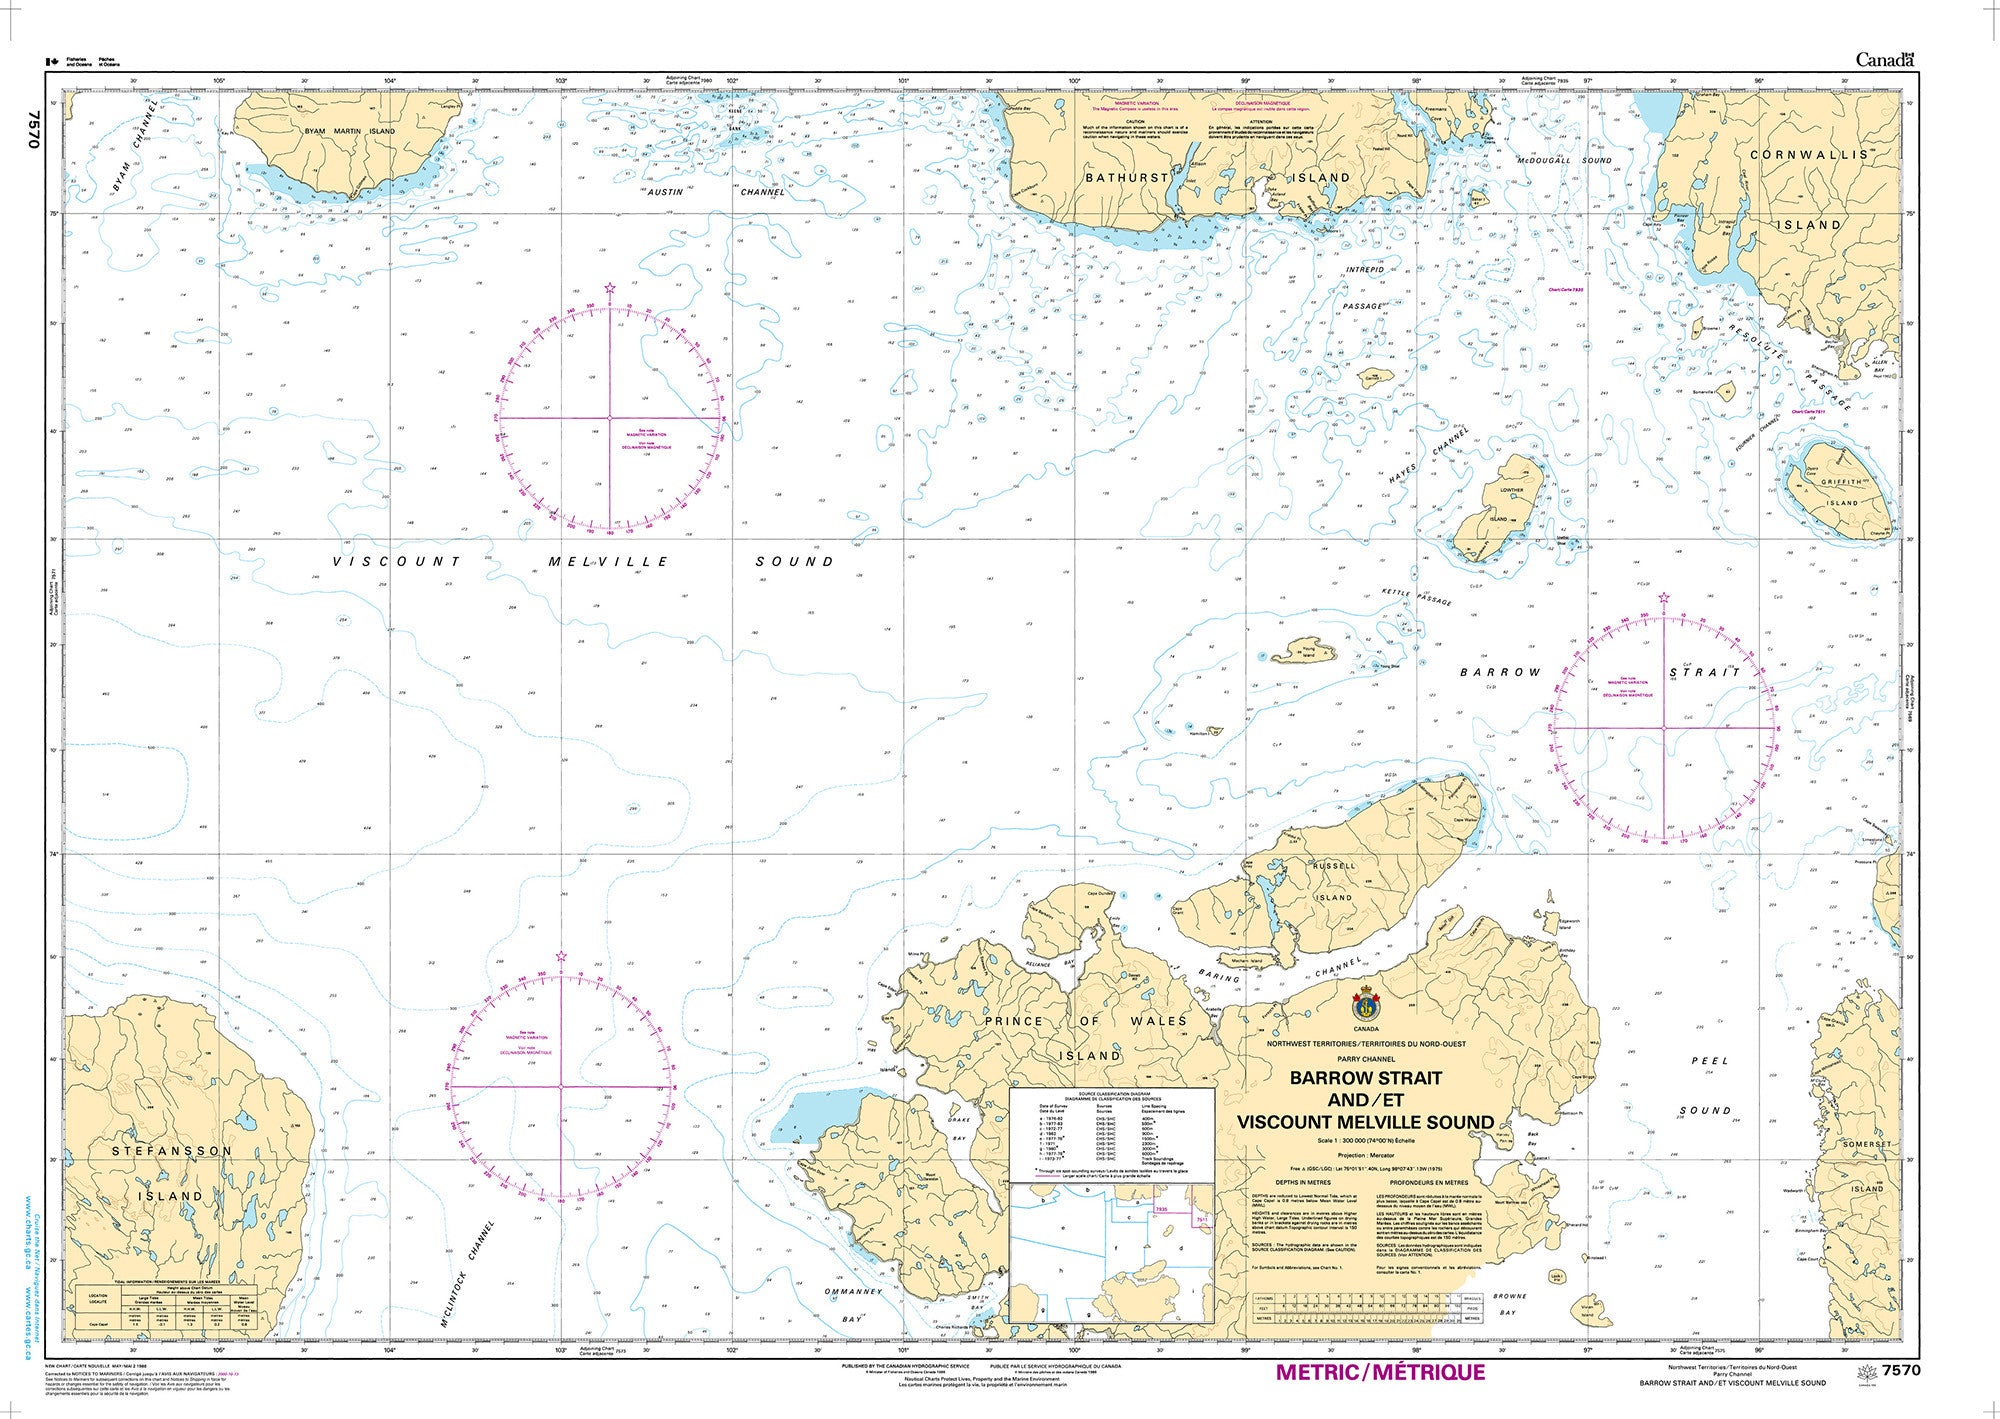 Canadian Hydrographic Service Nautical Chart CHS7570: Barrow Strait and/et Viscount Melville Sound